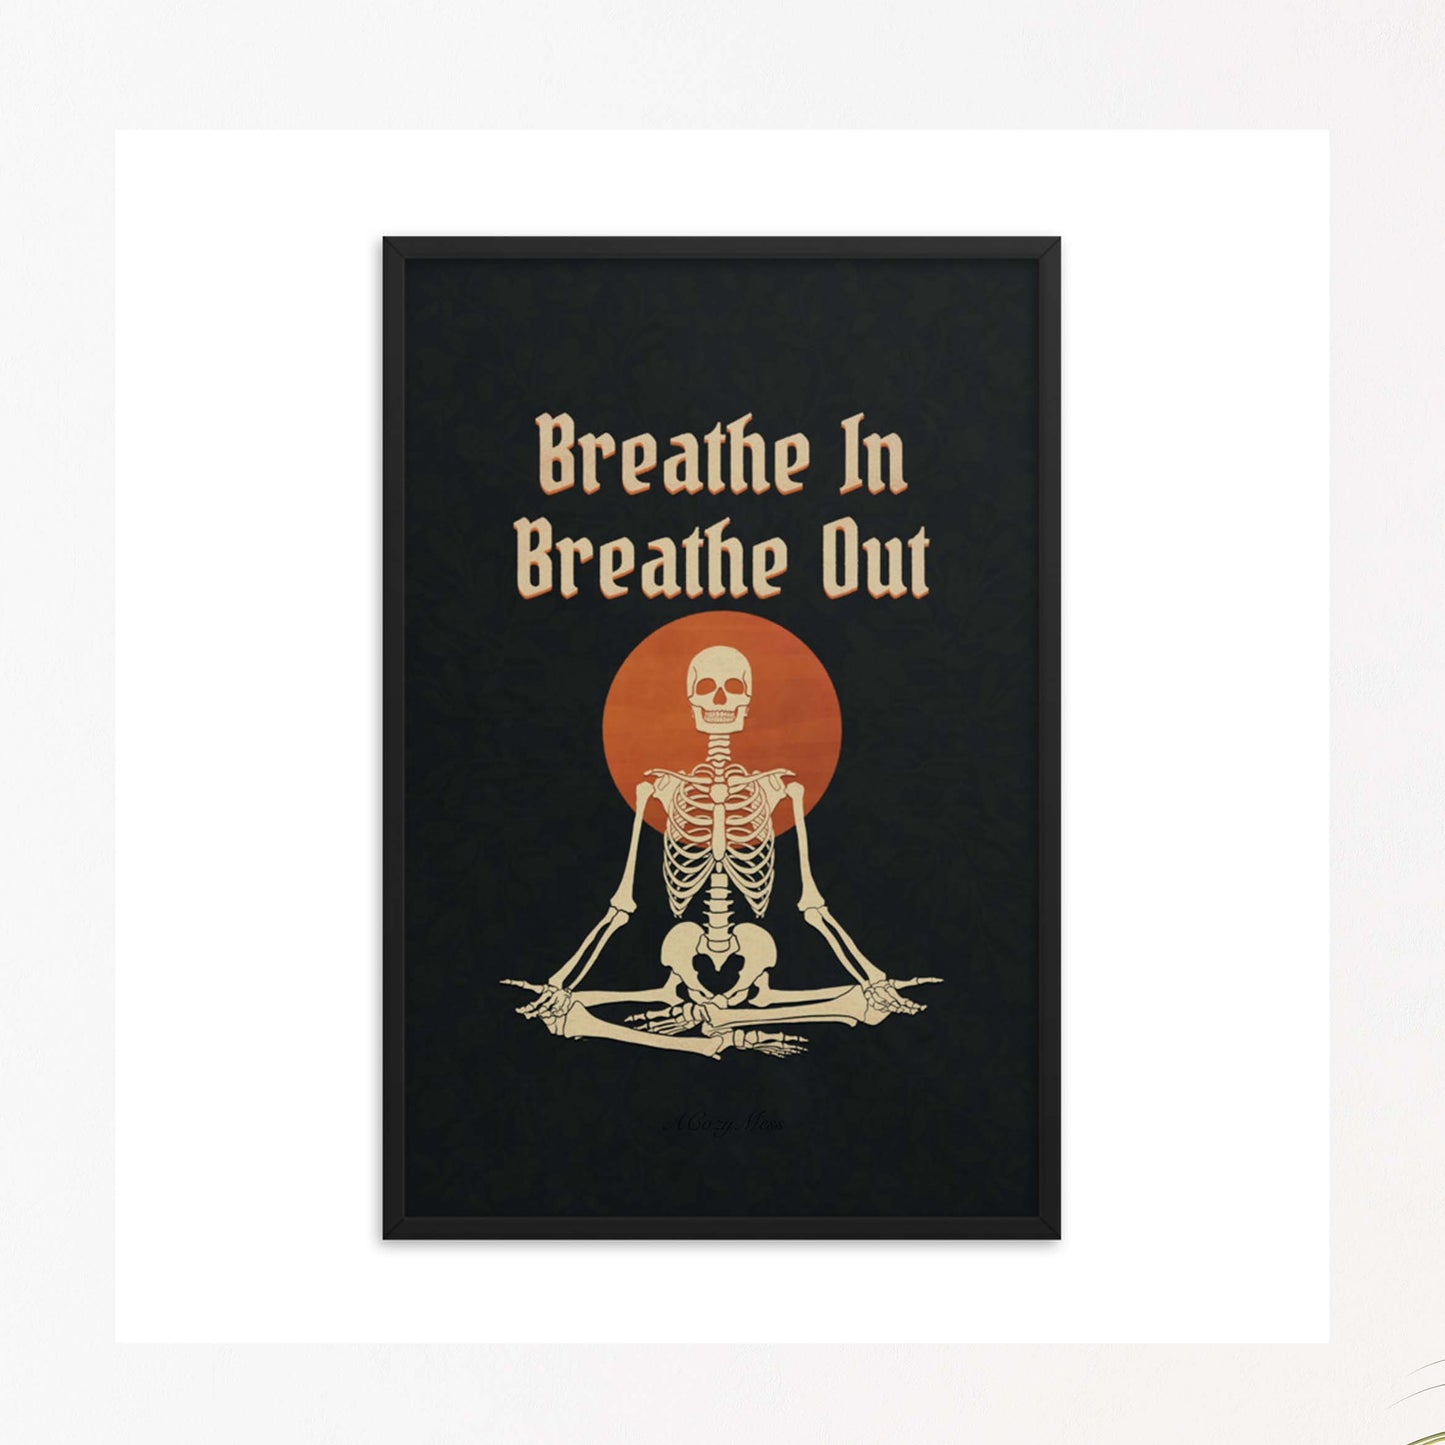 " Breathe in breathe Out" with an illustration of a meditating skeleton in beige and orange on black background